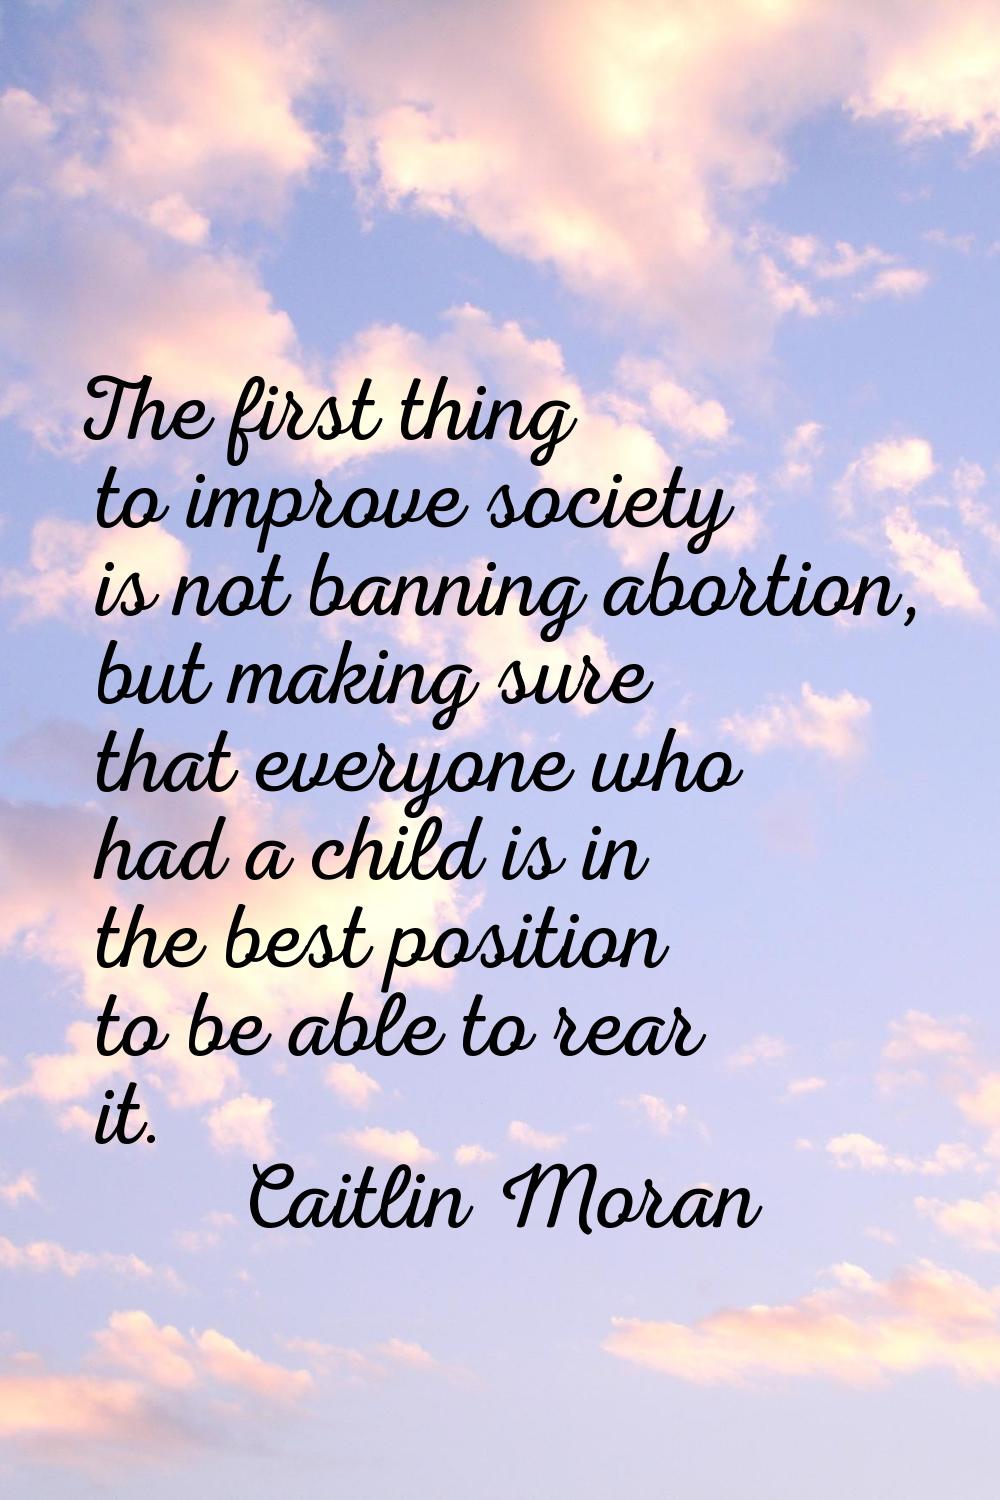 The first thing to improve society is not banning abortion, but making sure that everyone who had a